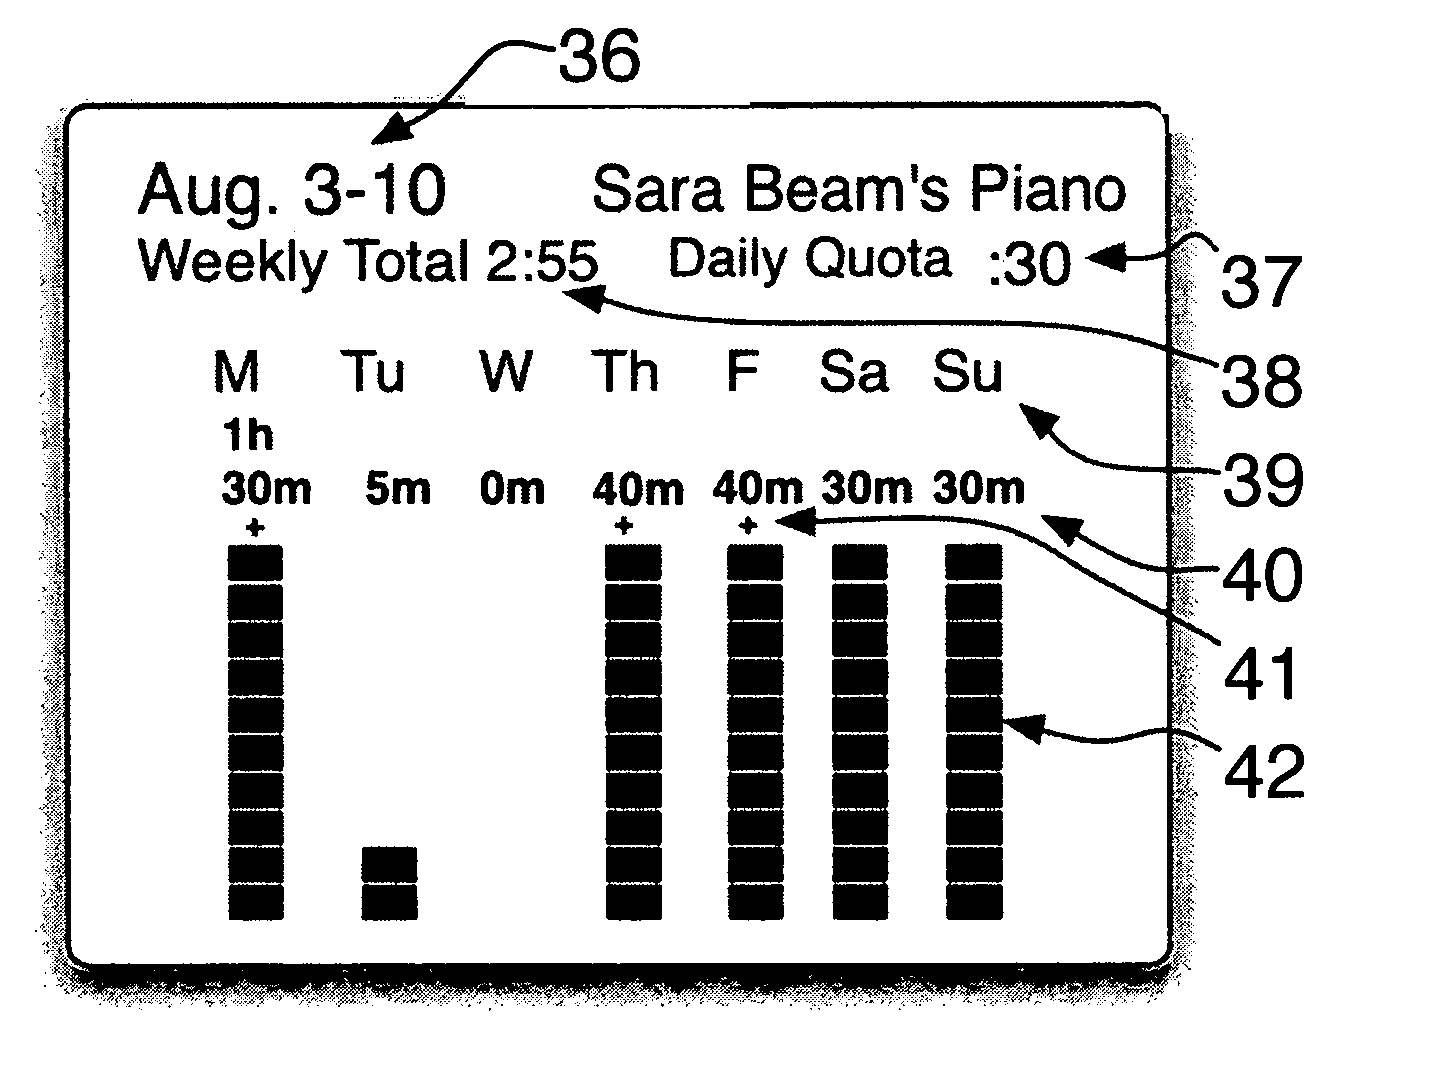 Electronic practice device